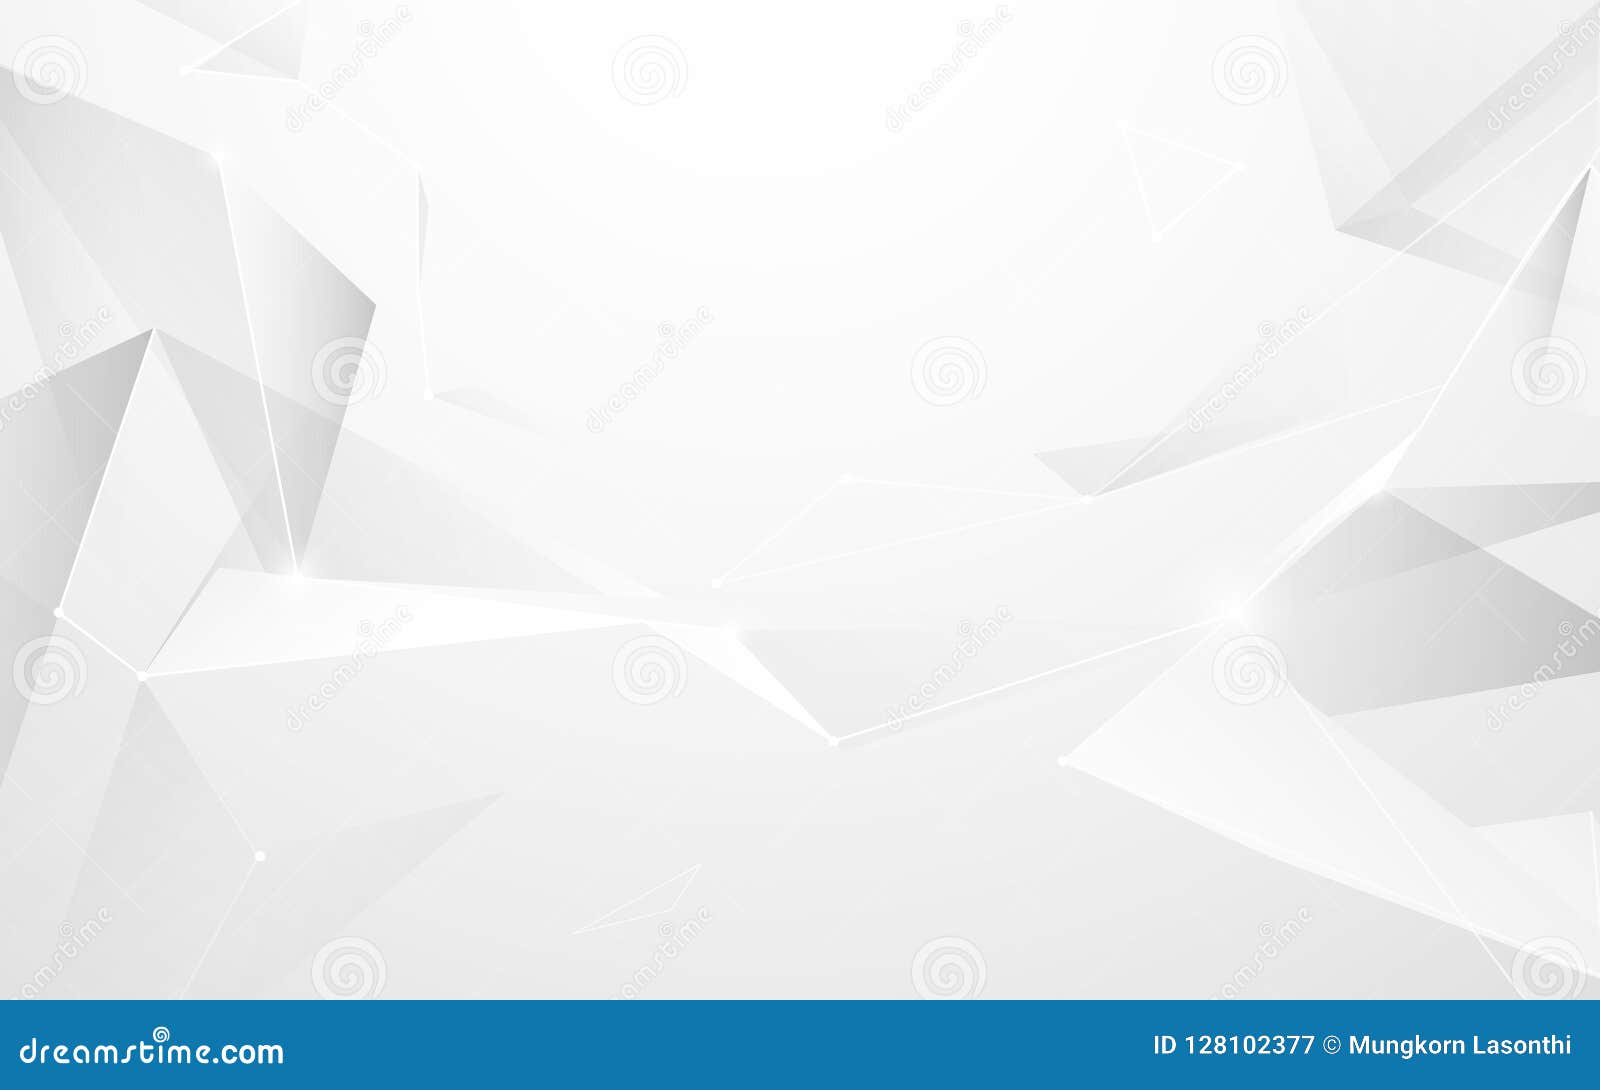 Molecules Structure Mesh on White Background. Science and Technology  Concept Stock Vector - Illustration of polygonal, mesh: 128102377